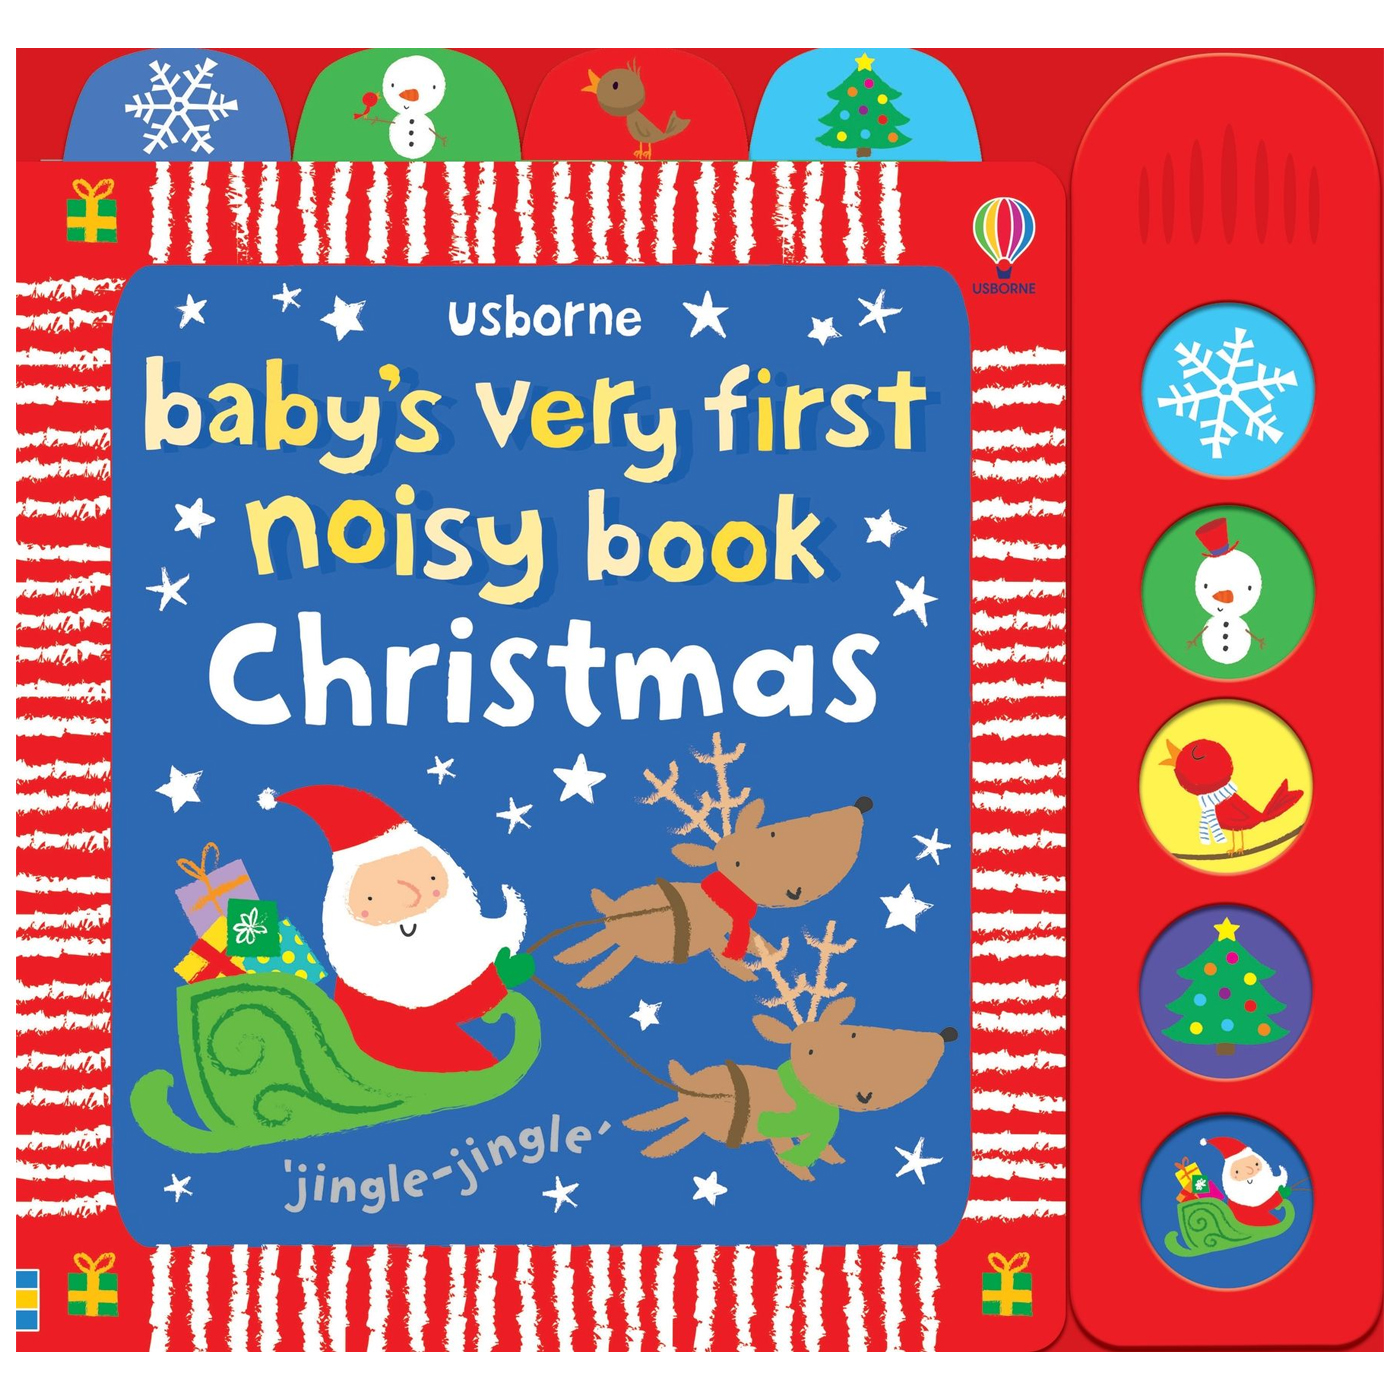  Baby's Very First Noisy Book Christmas